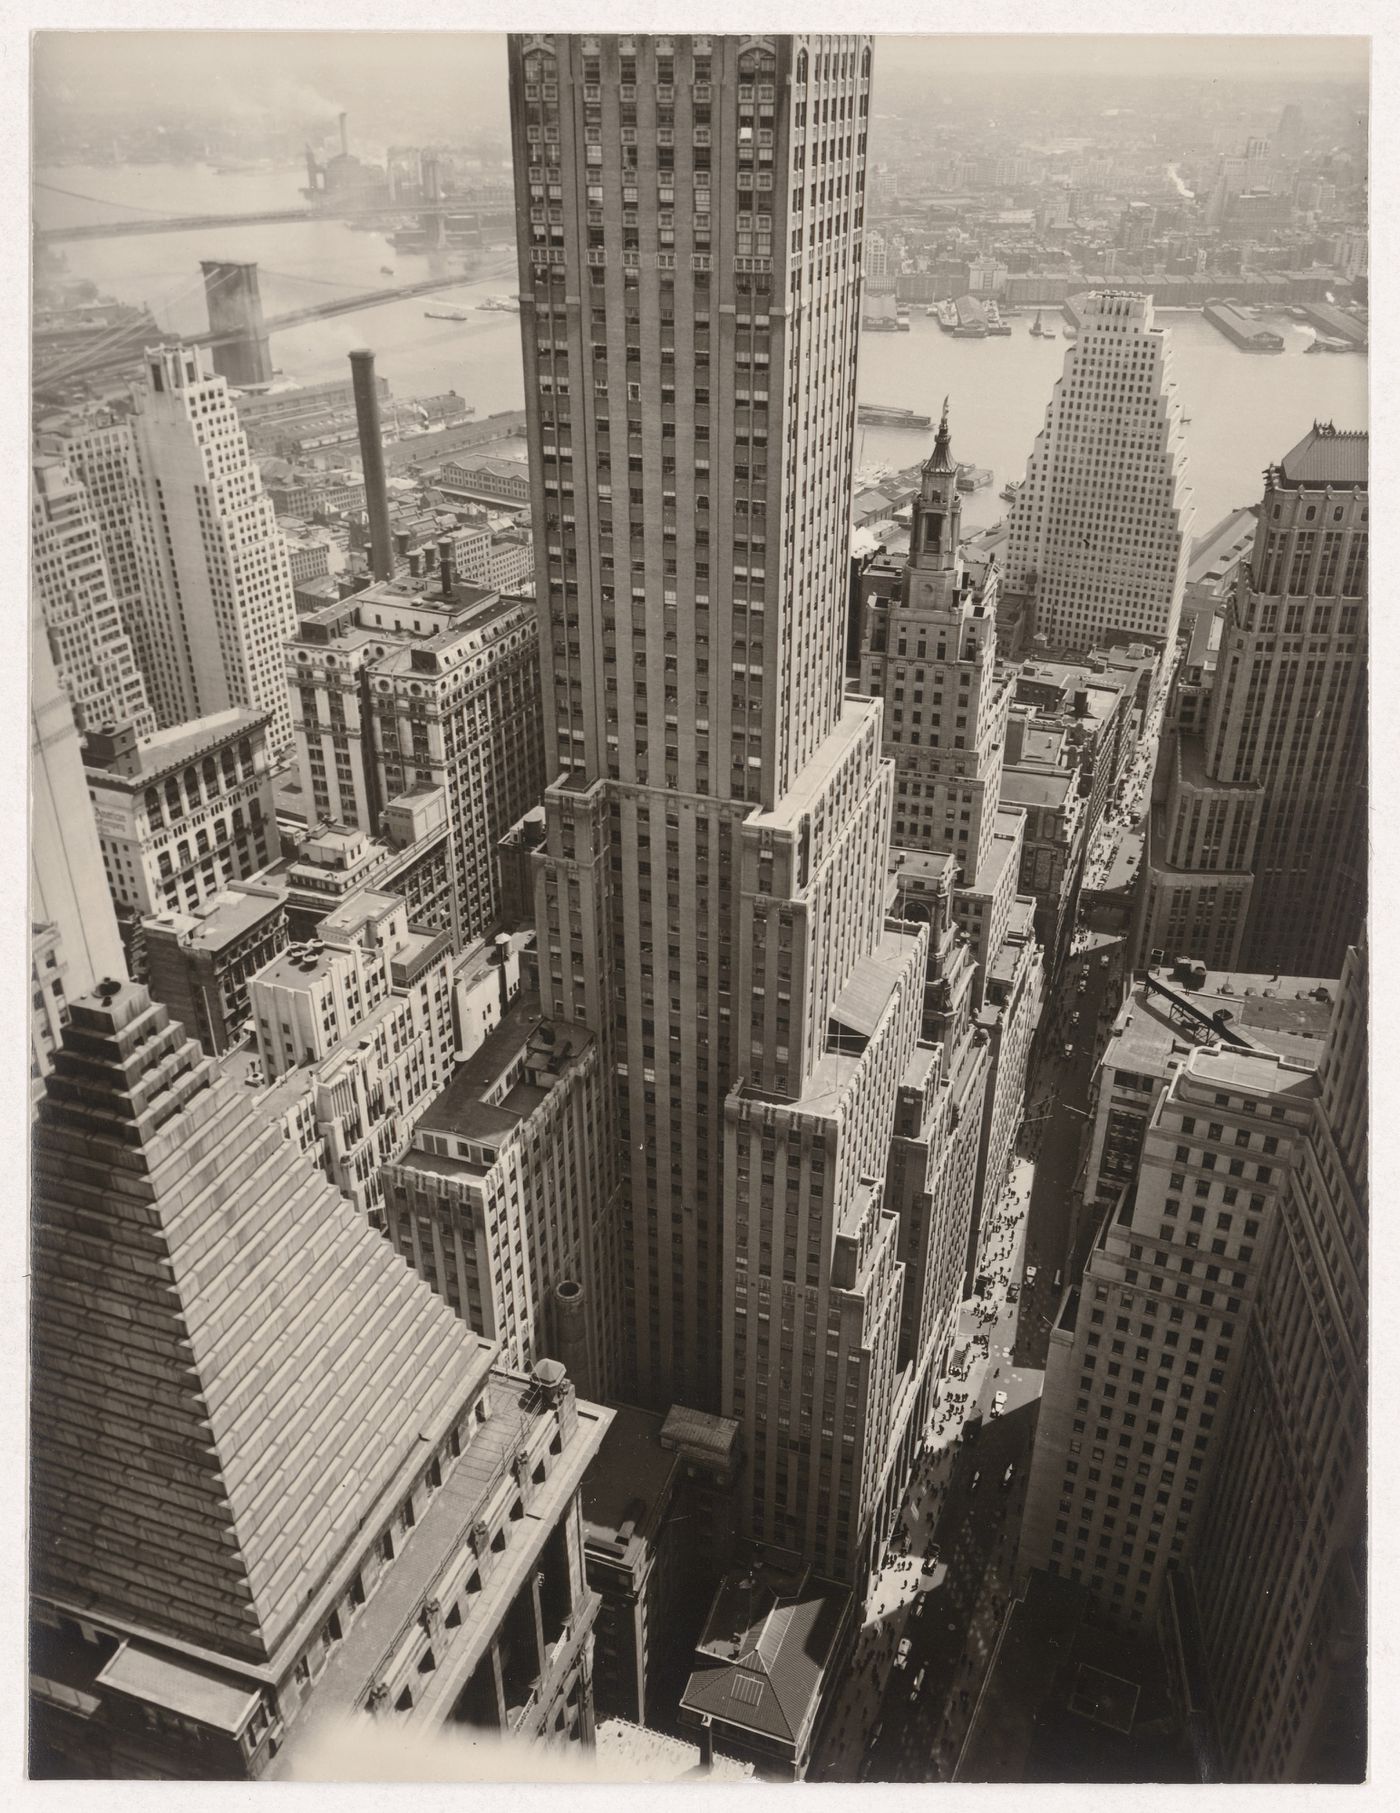 View of Wall Street showing the 40 Wall Street with the Brooklyn and Manhattan bridges in the background, from the Irvin Trust Company building, Manhattan, New York (City), New York